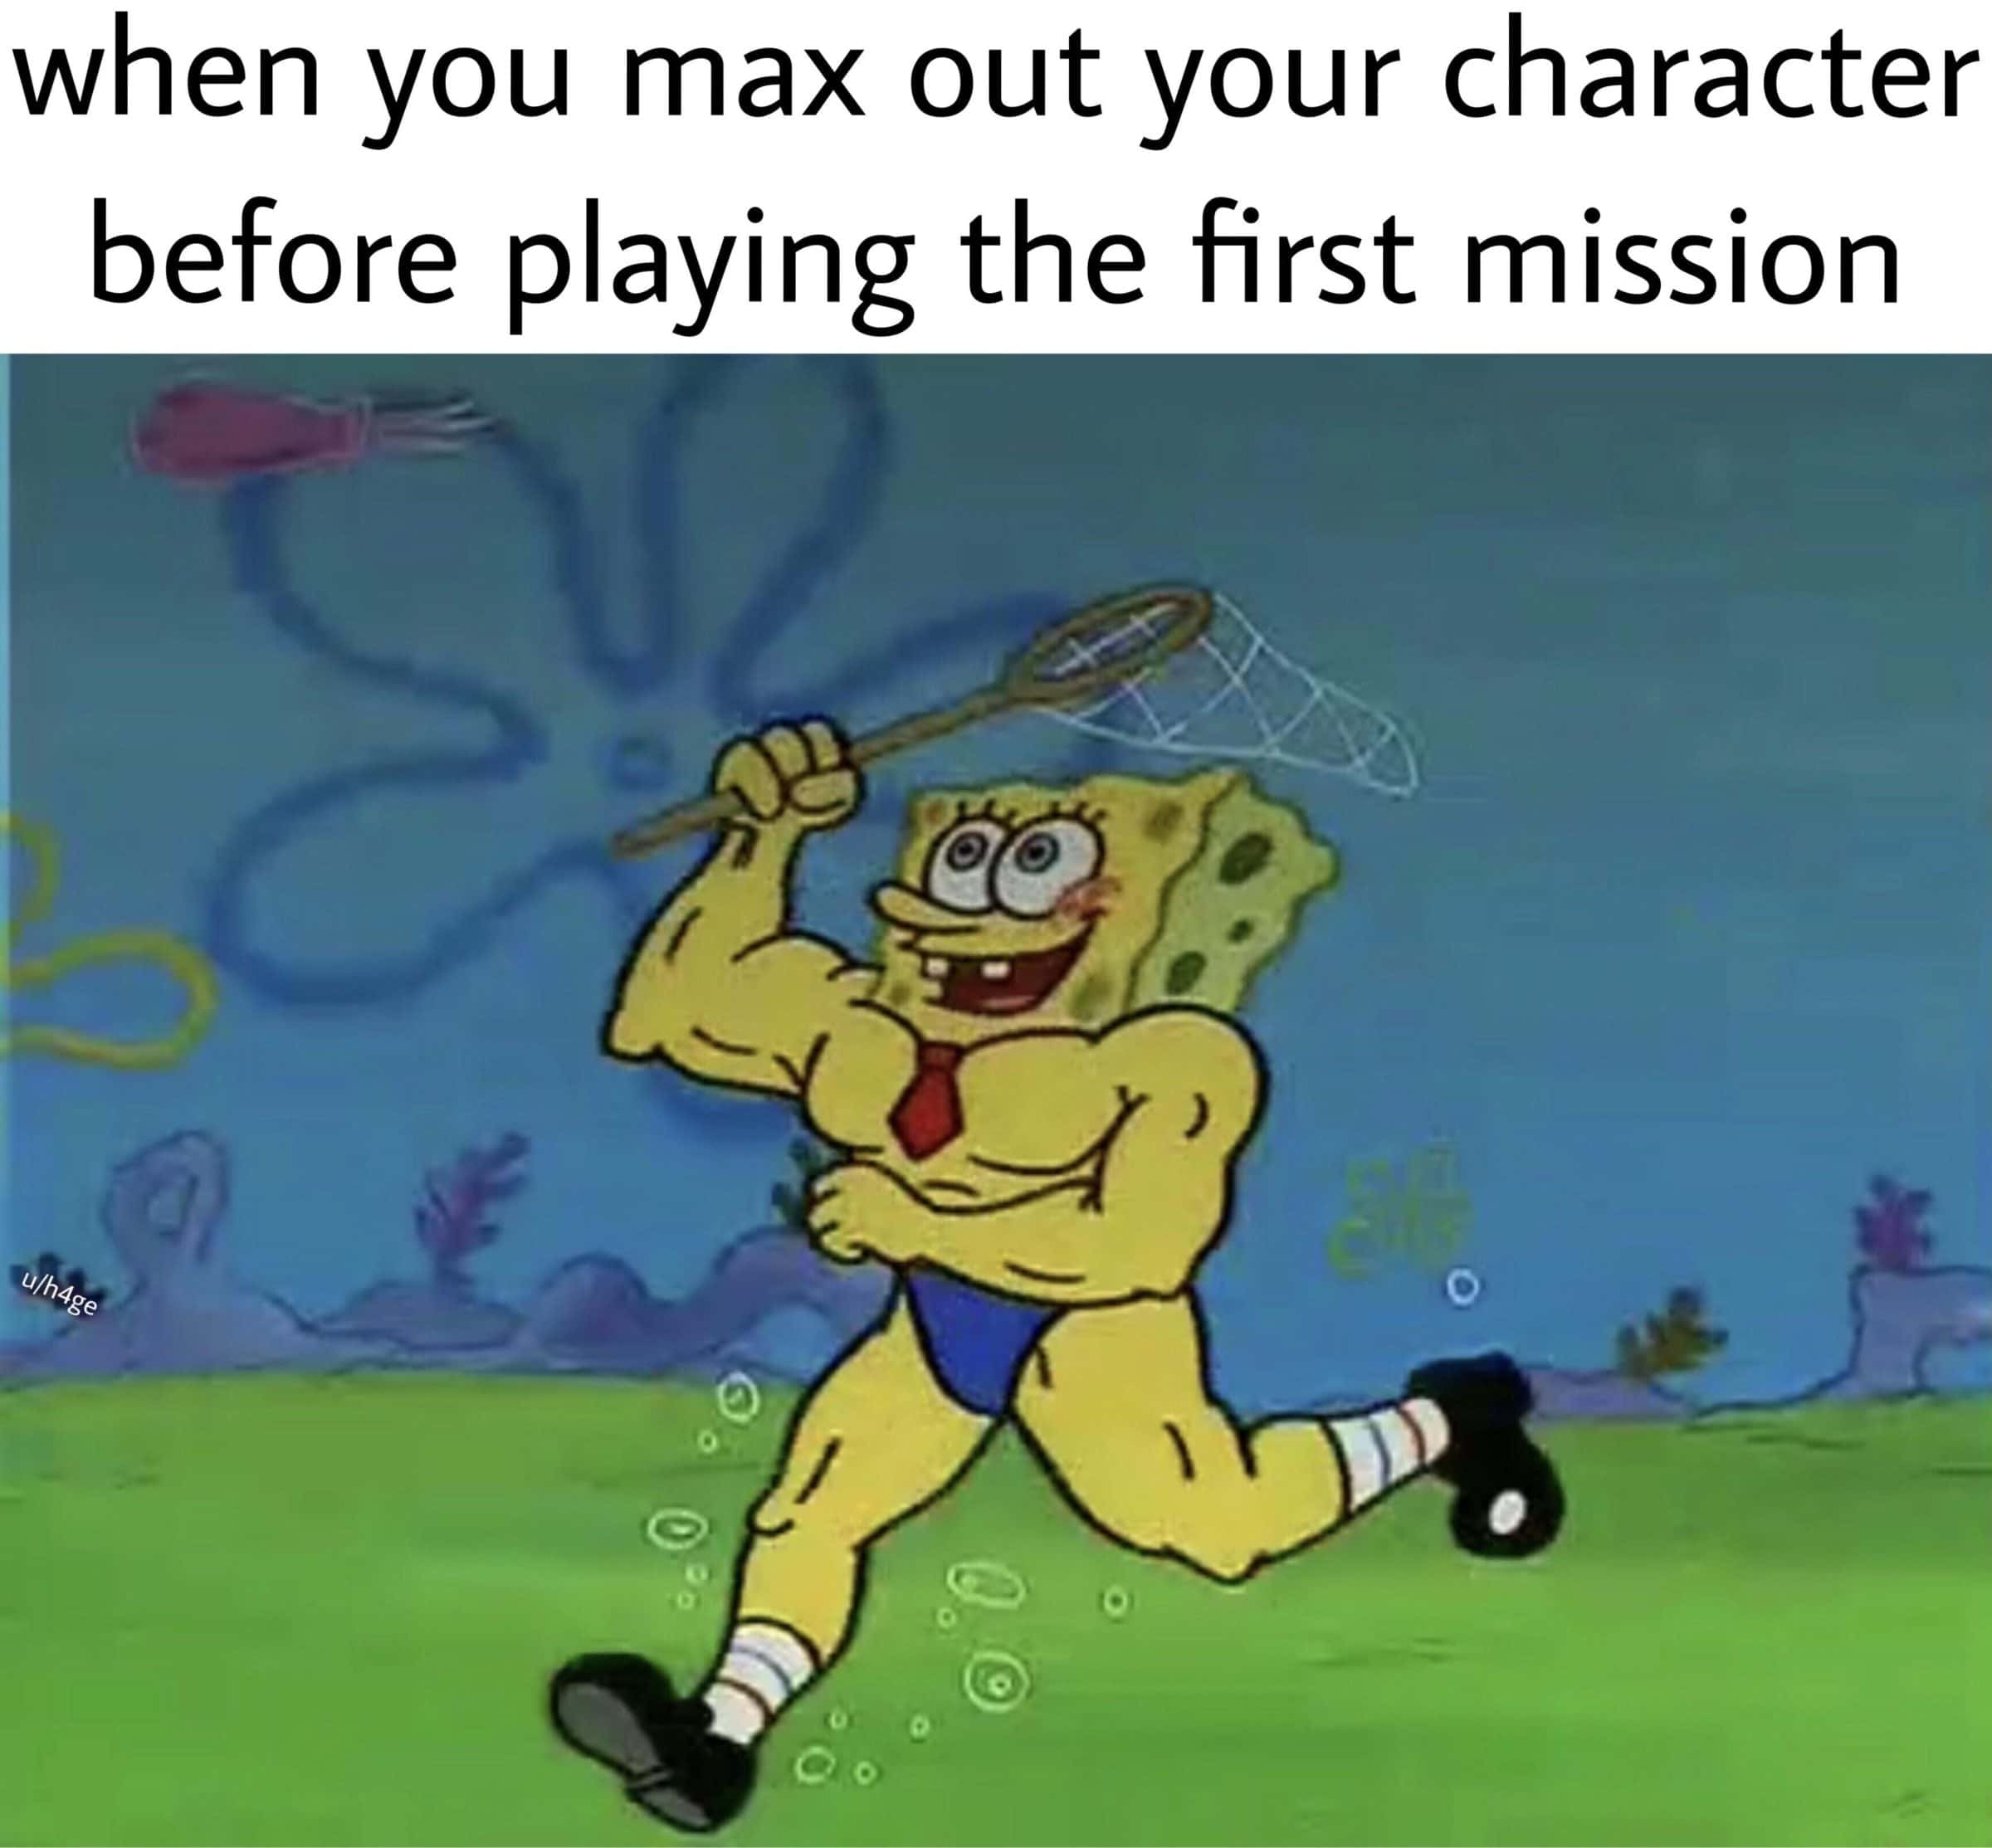 spongebob spongebob-memes spongebob text: when you max out your character before playing the first mission 01/748 e 